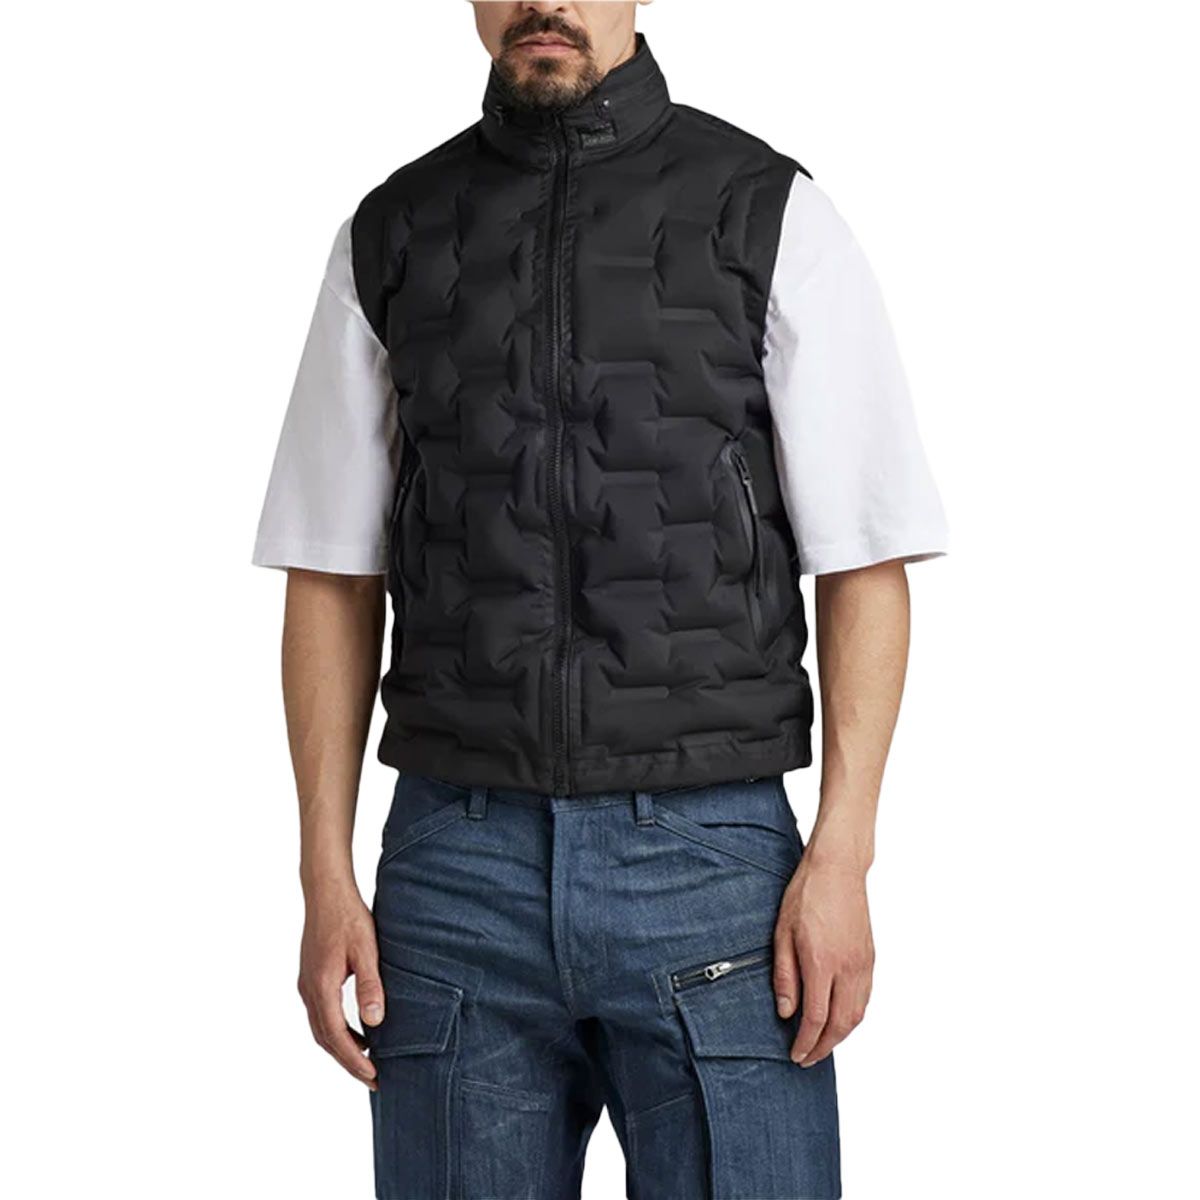 Inflatable Body Warmer